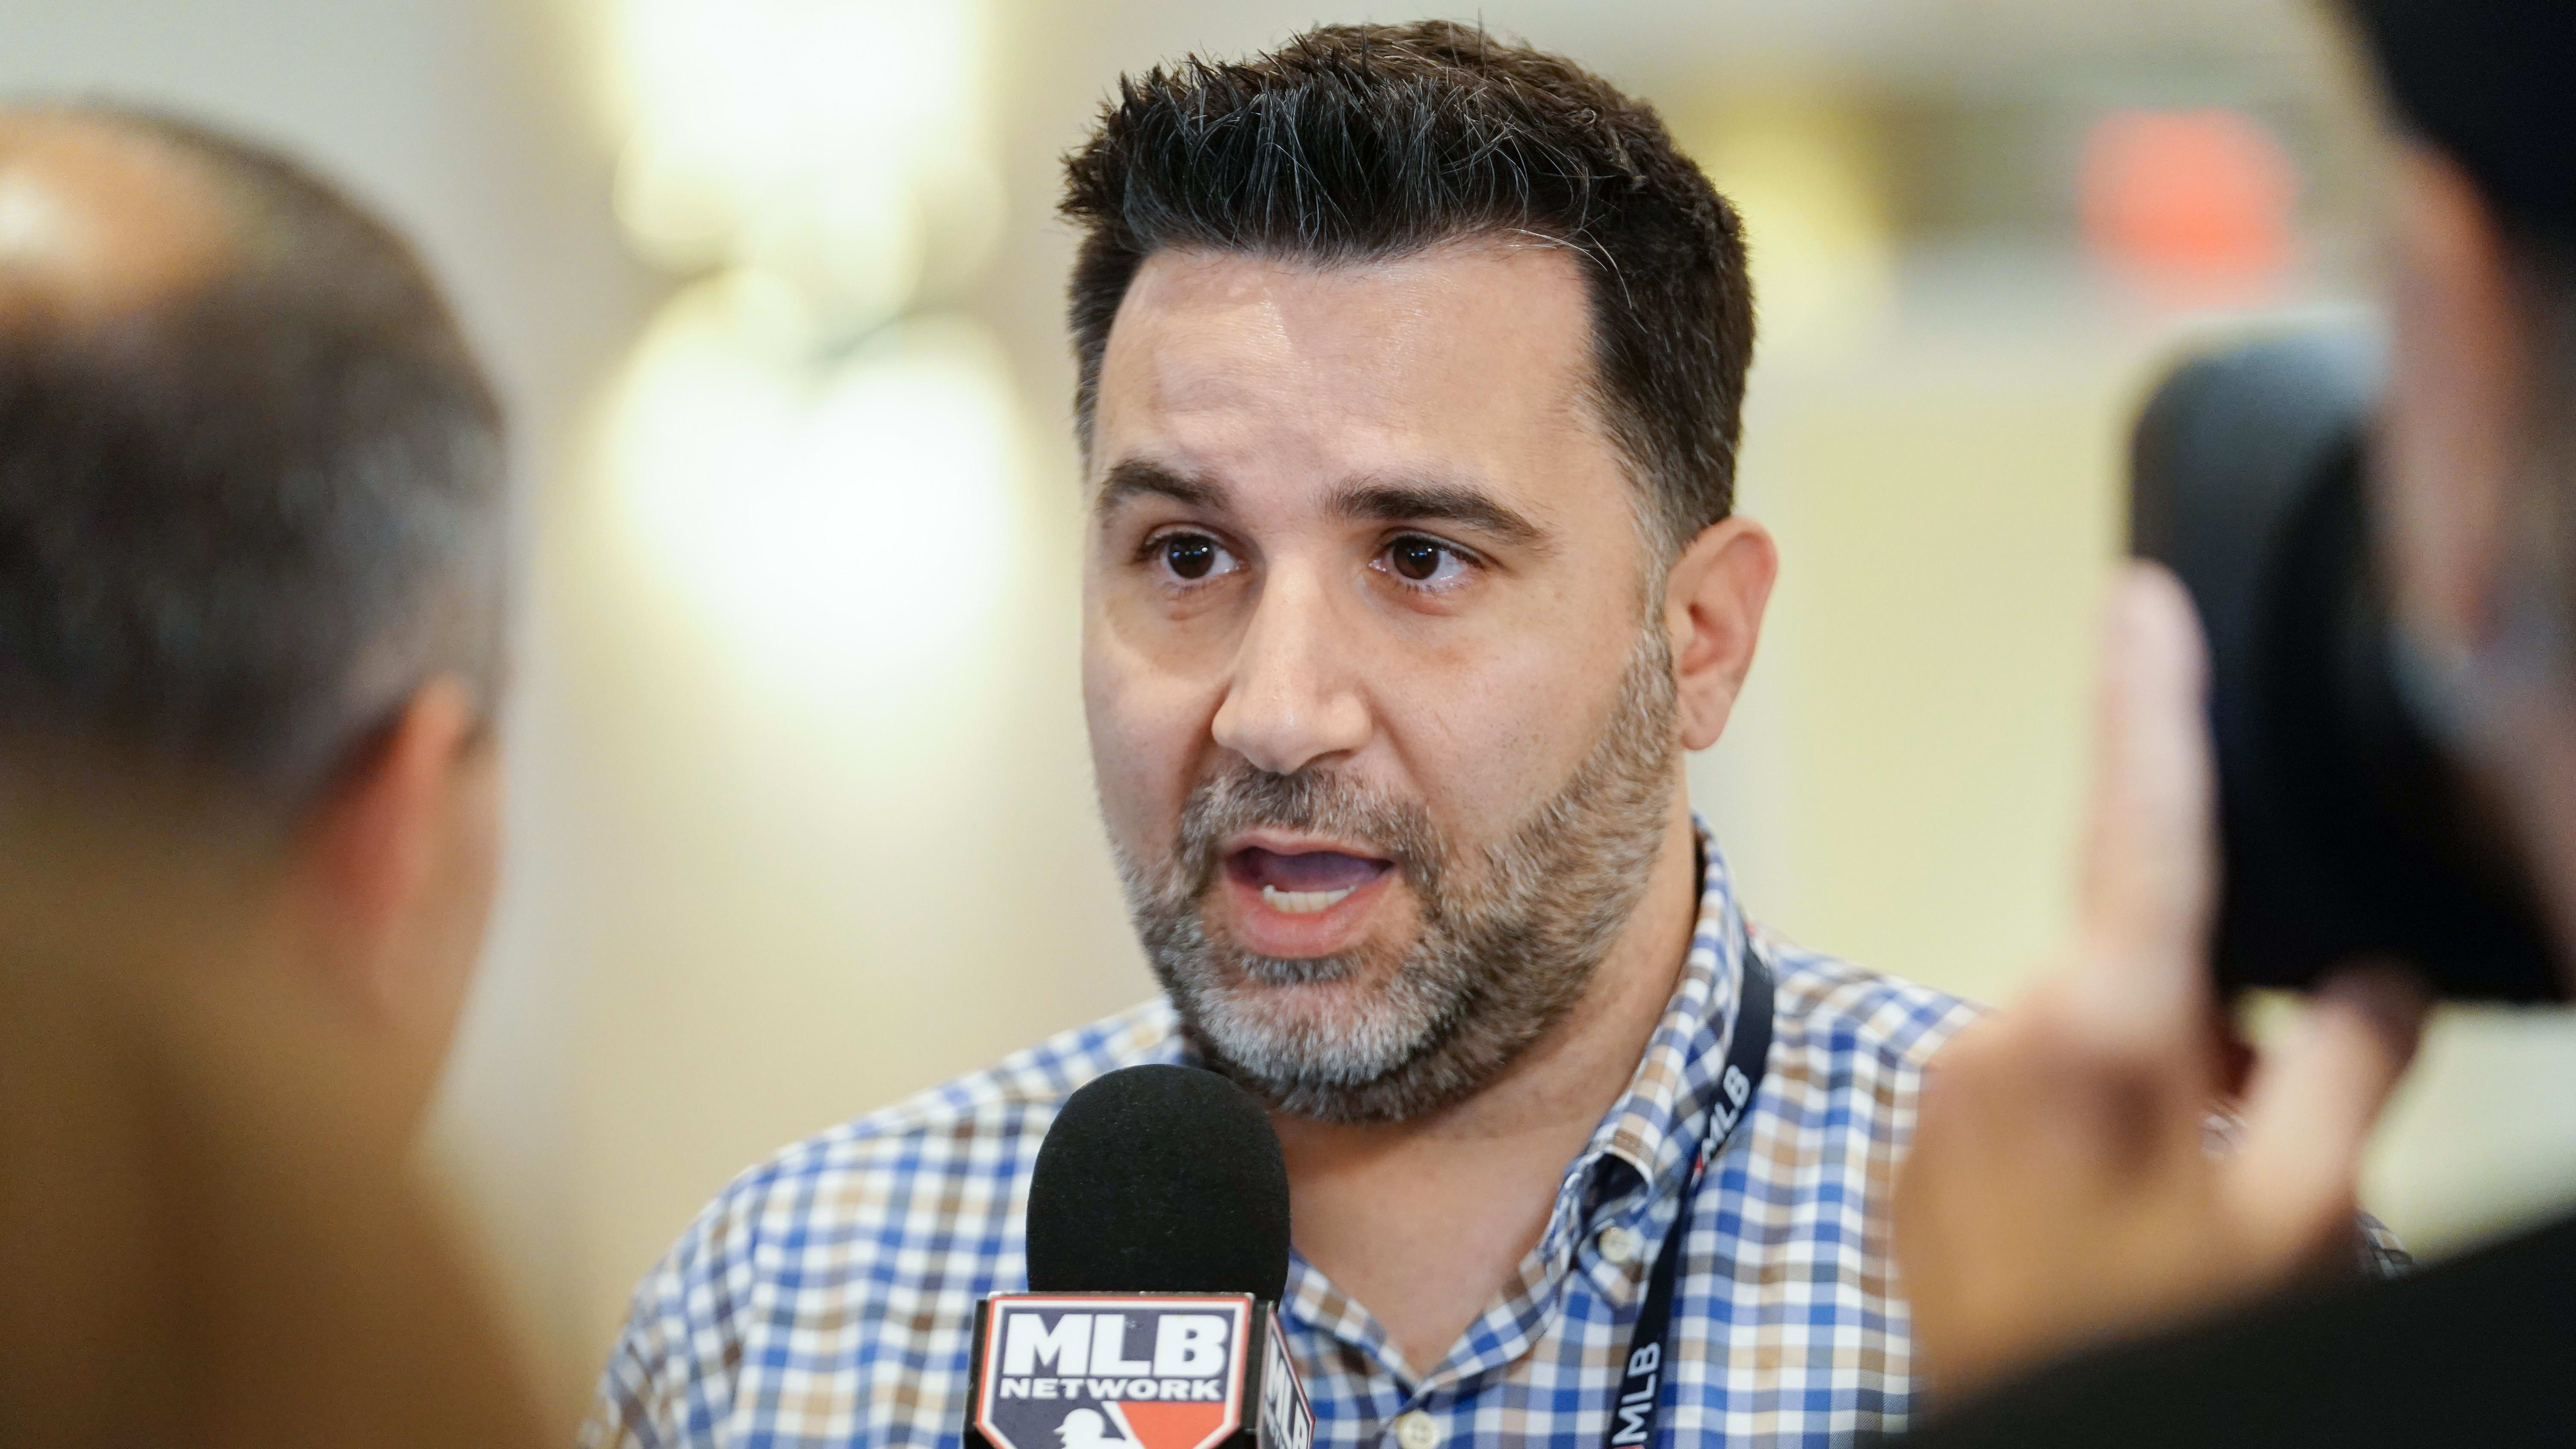 Atlanta Braves general manager Alex Anthopoulos has guided the organization to new heights of sustainable success